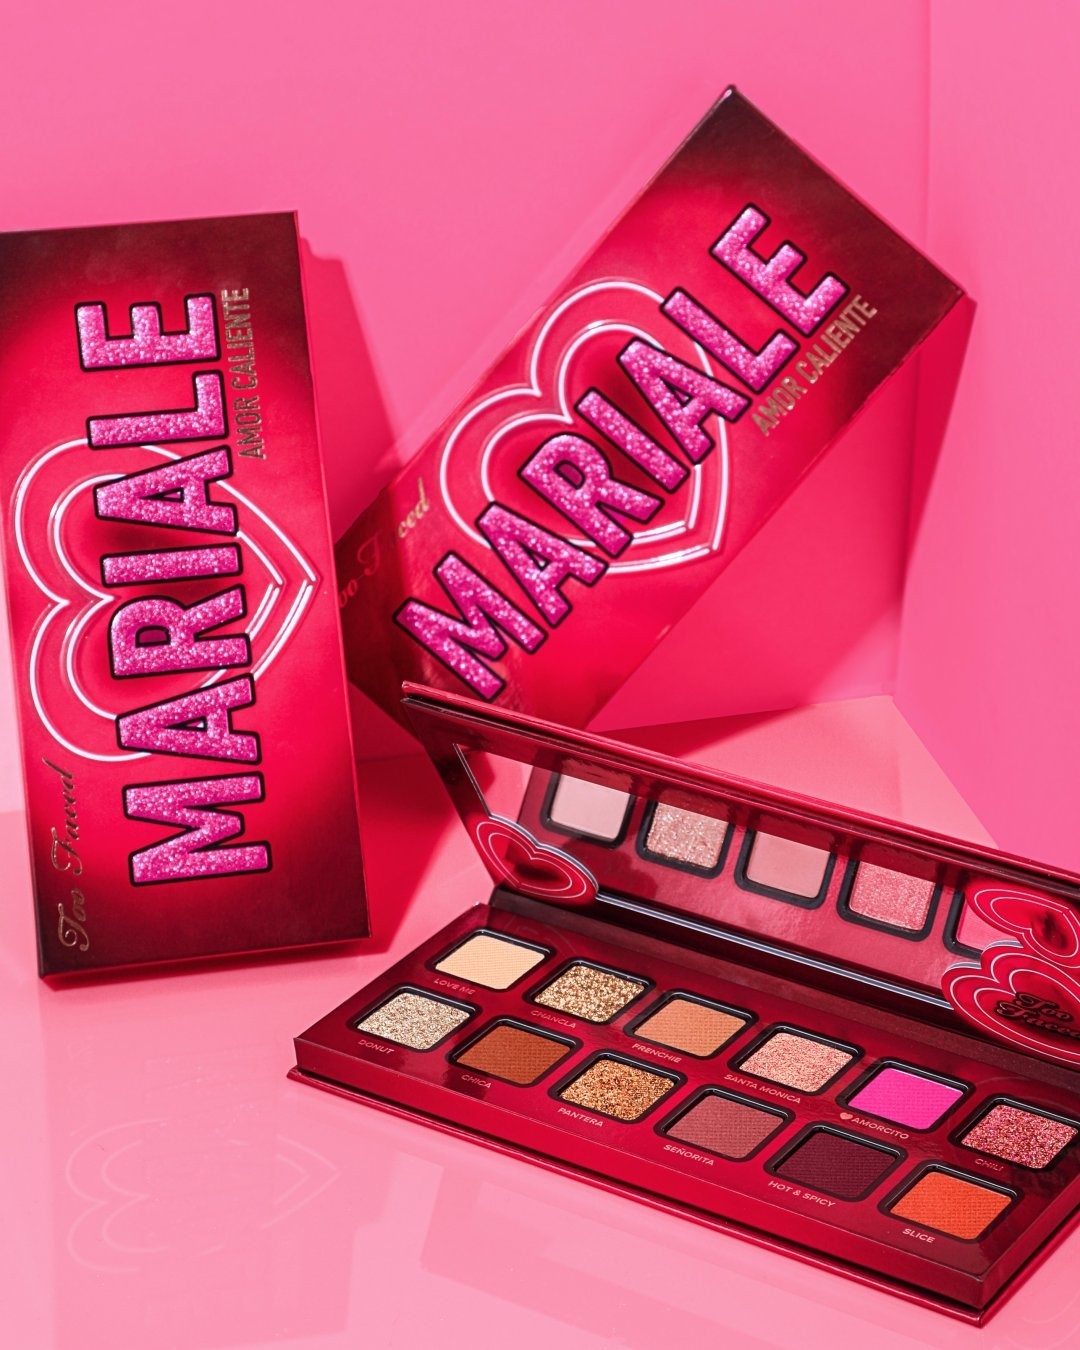 Too Faced Cosmetics - Fall in love with sexy color 💖 Our NEW #TooFacedxMariale Amor Caliente Palette is packed with modern, wearable mattes, & shimmers that make it easy to create @Mariale's signature...